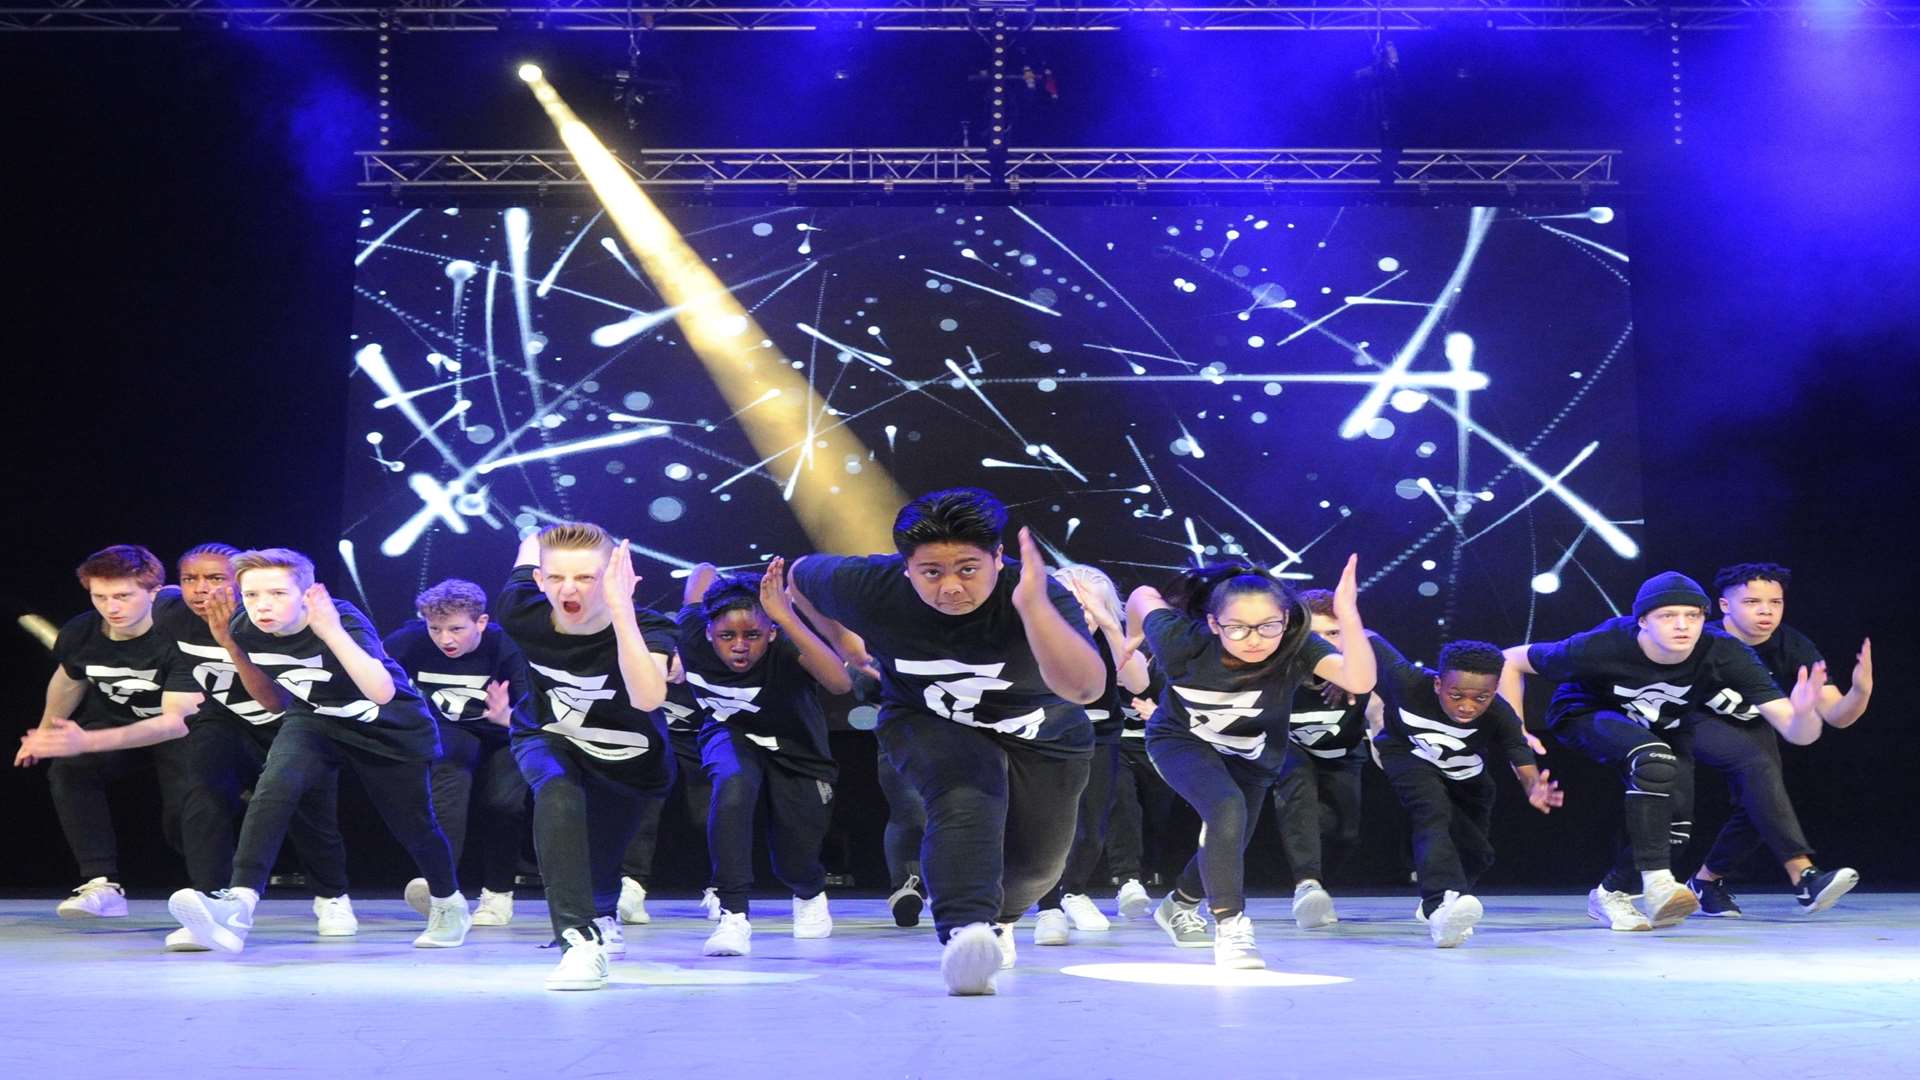 Zoo Nation Youth Company (ZYC) will be performing their best hip-hop dance routines at the gala event